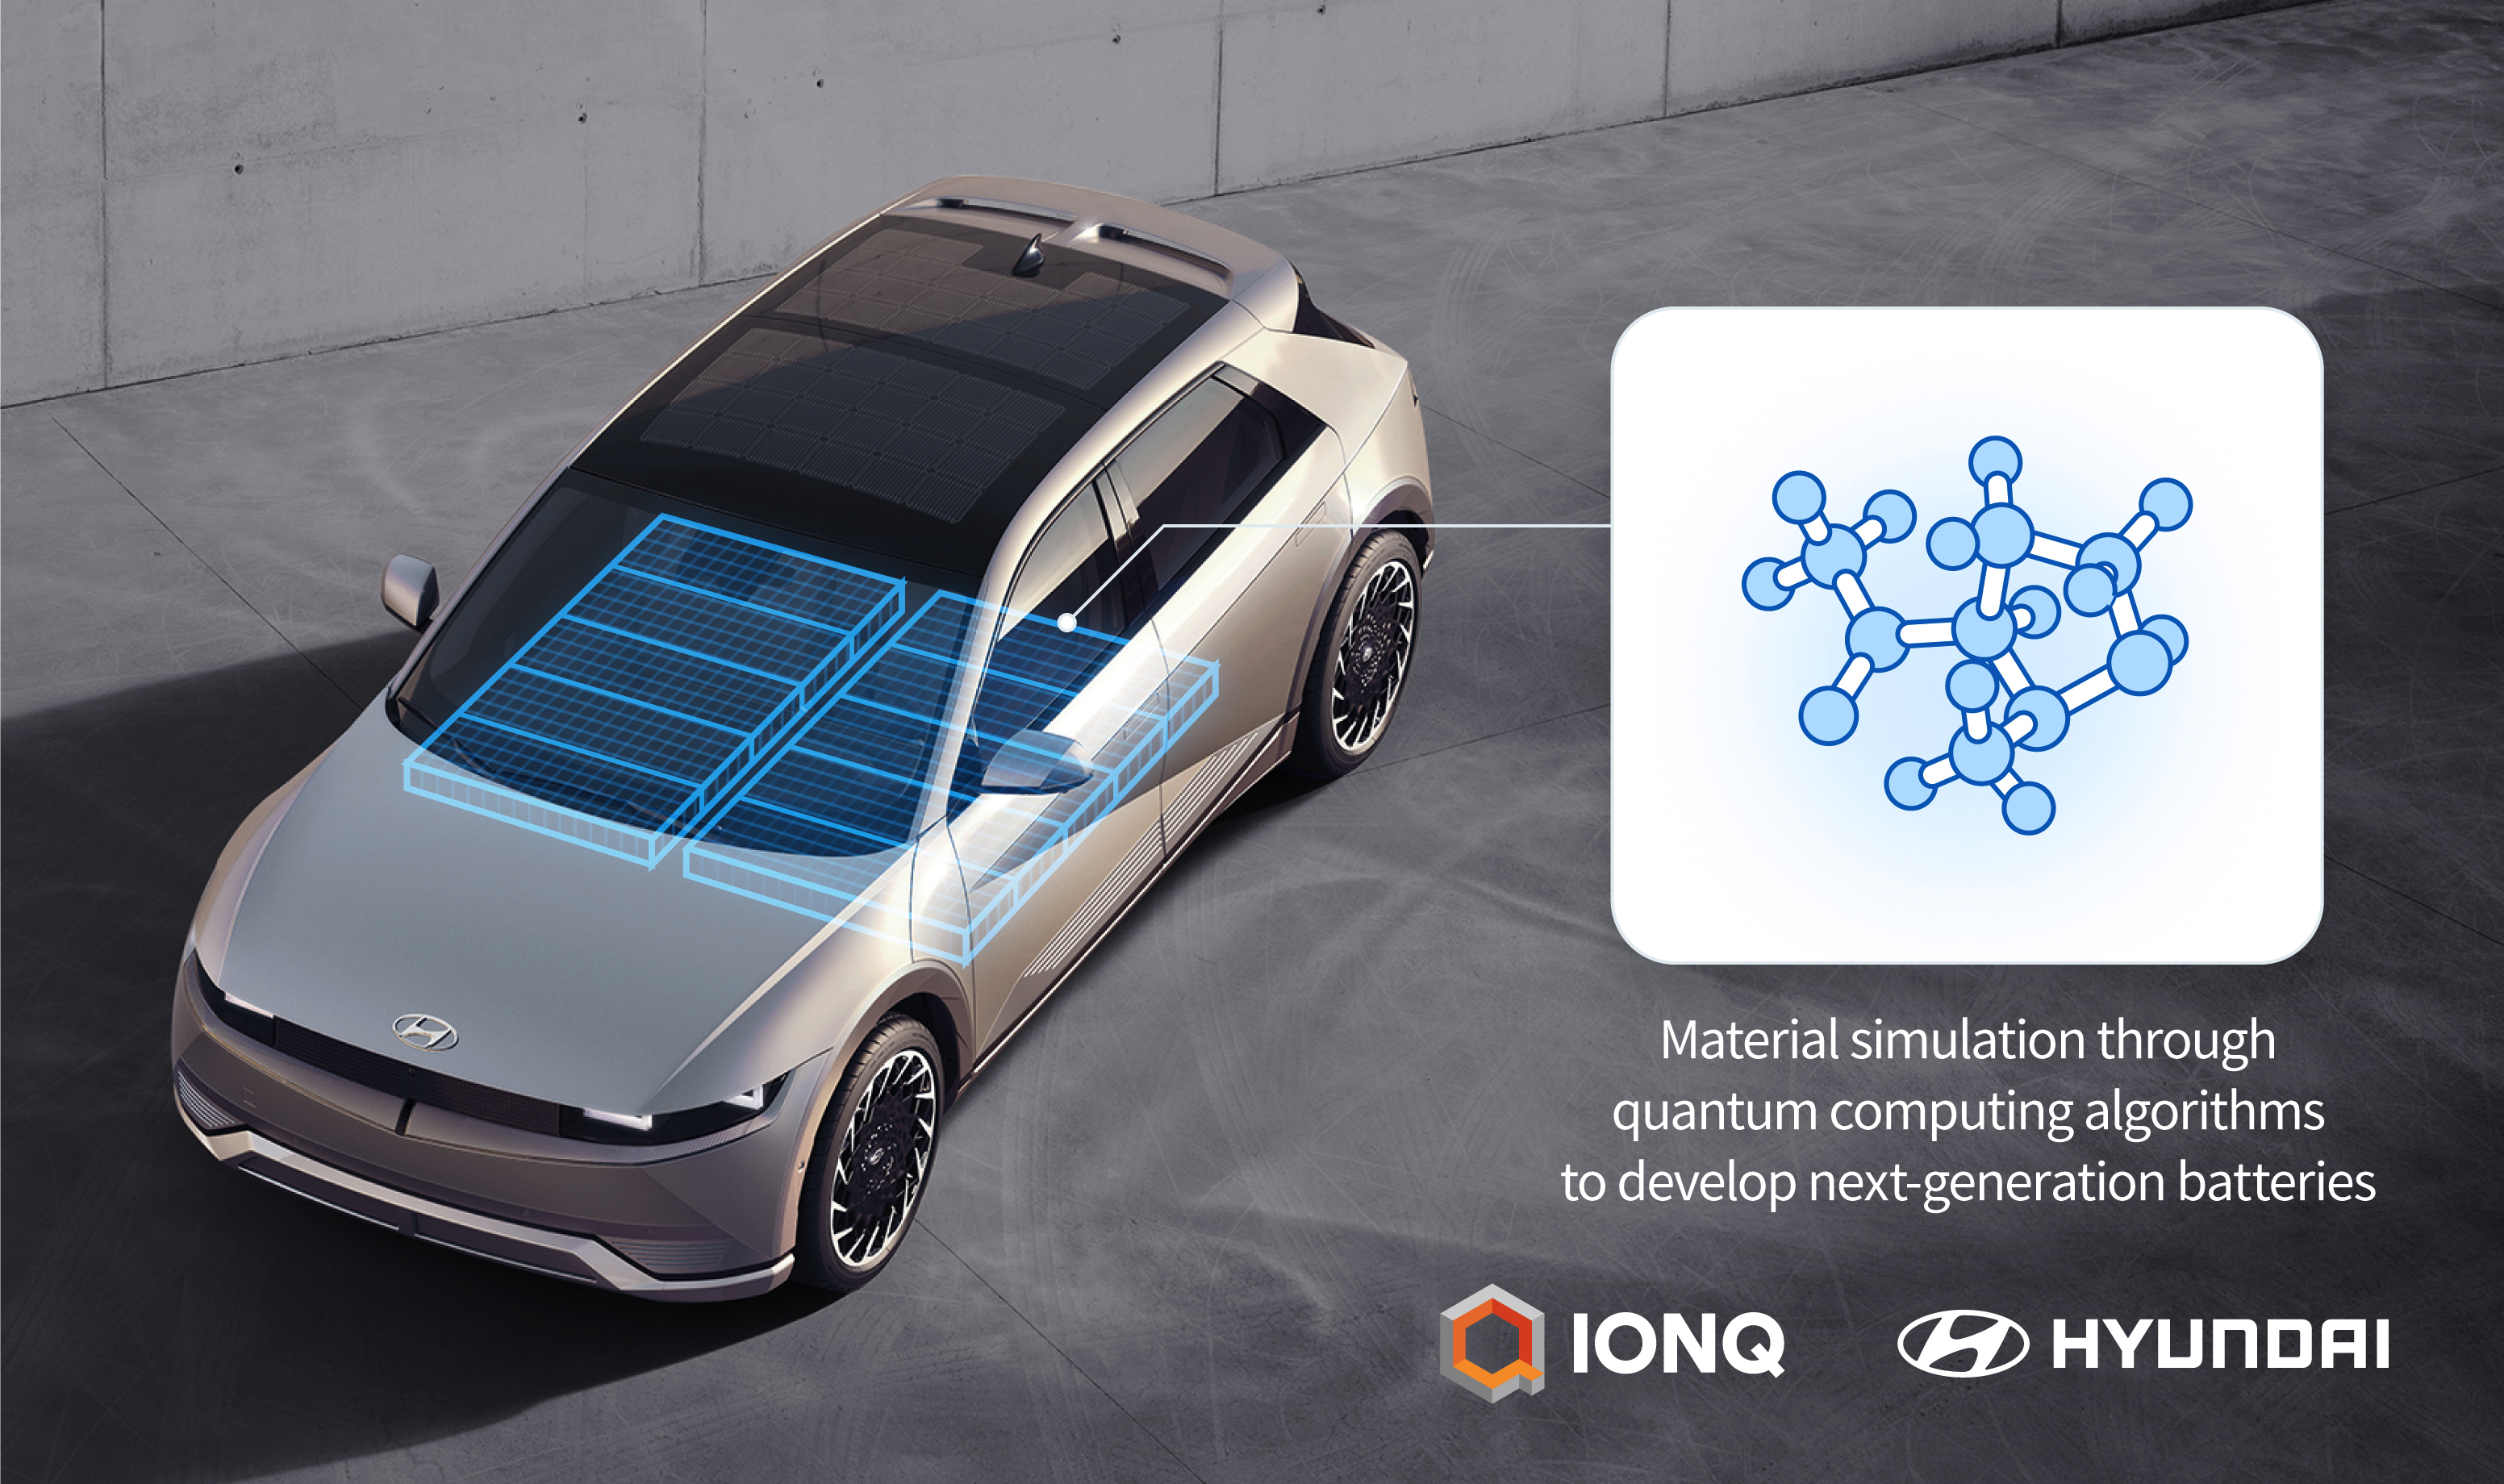 IonQ is helping Hyundai to develop improved batteries through quantum computing.